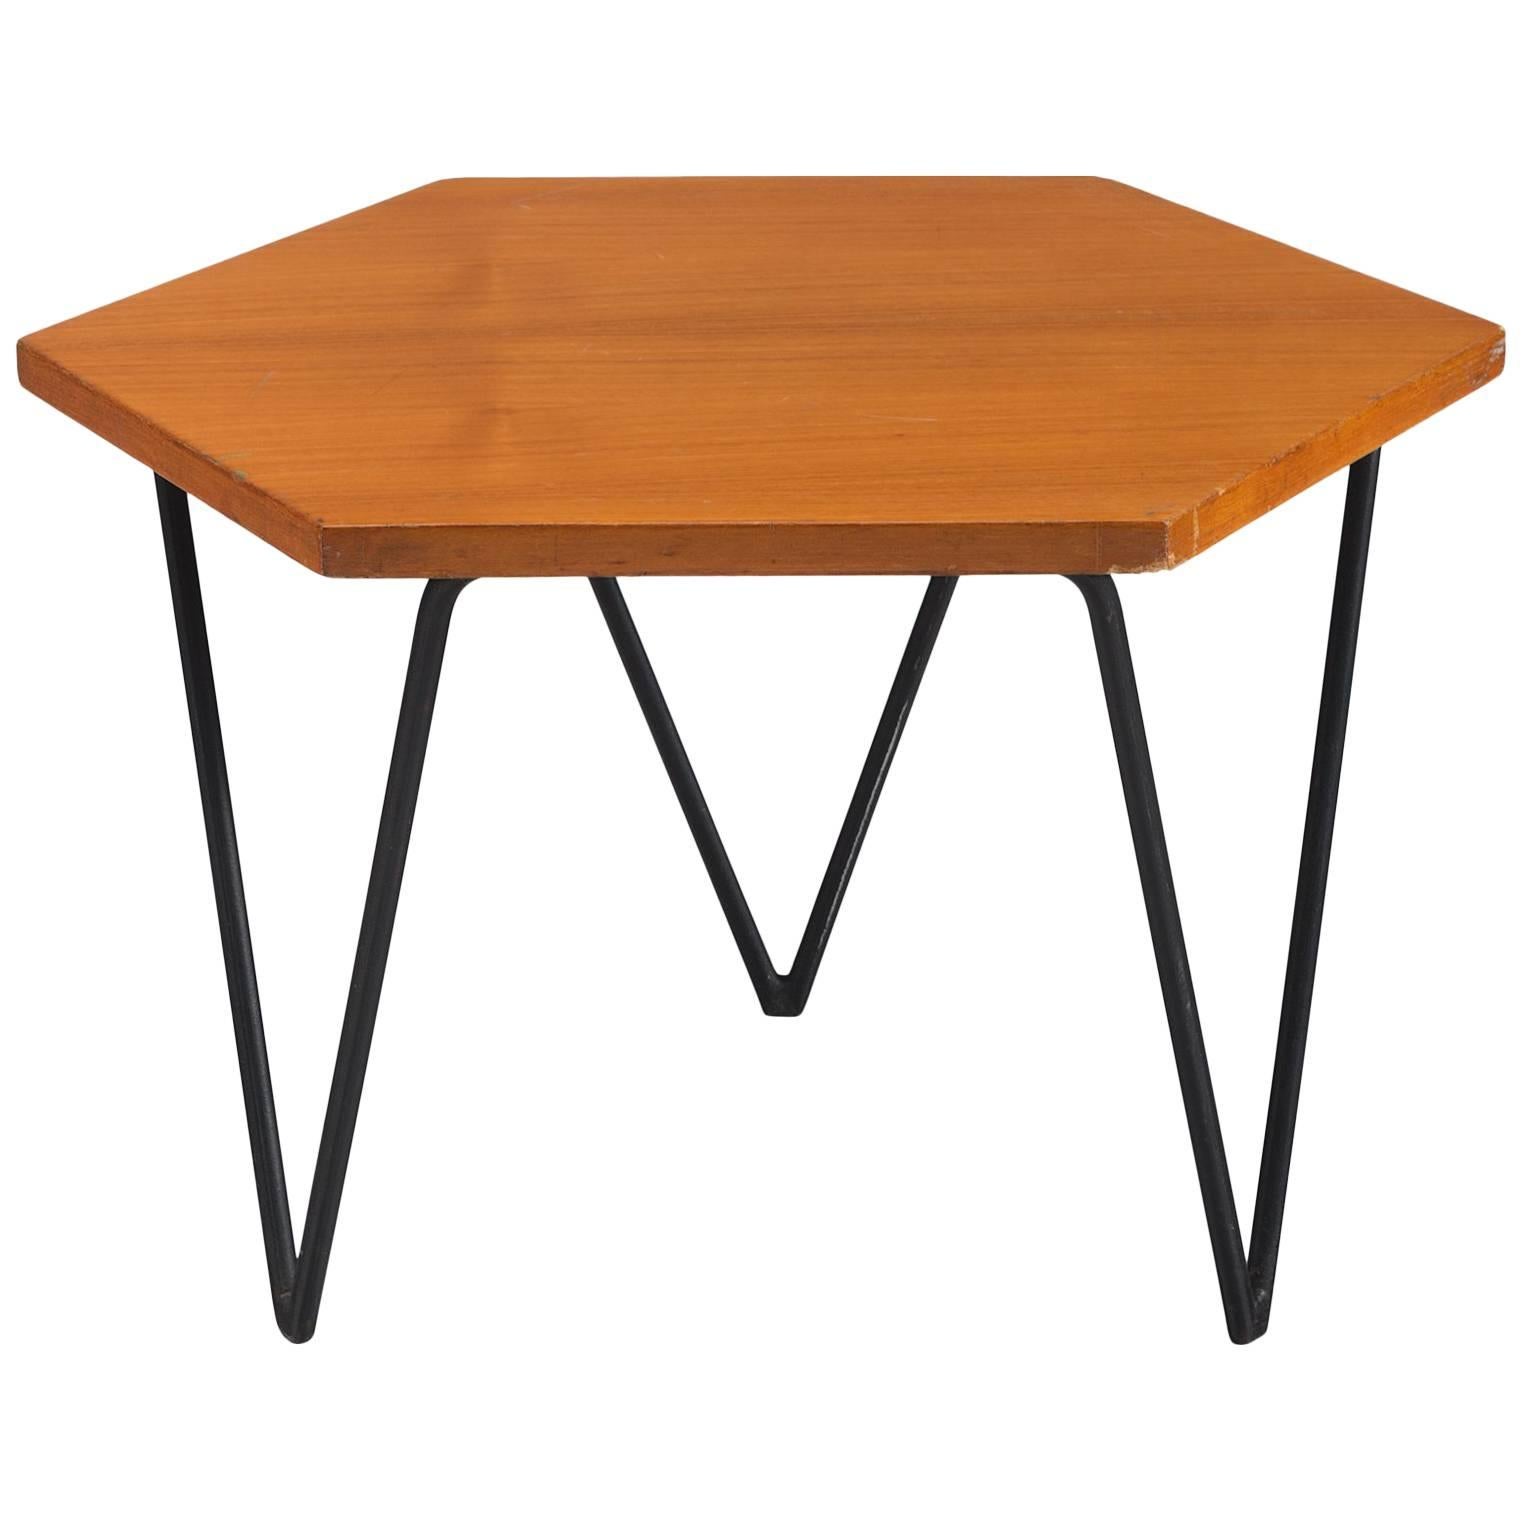 Gio Ponti for ISA Segmented Side Table